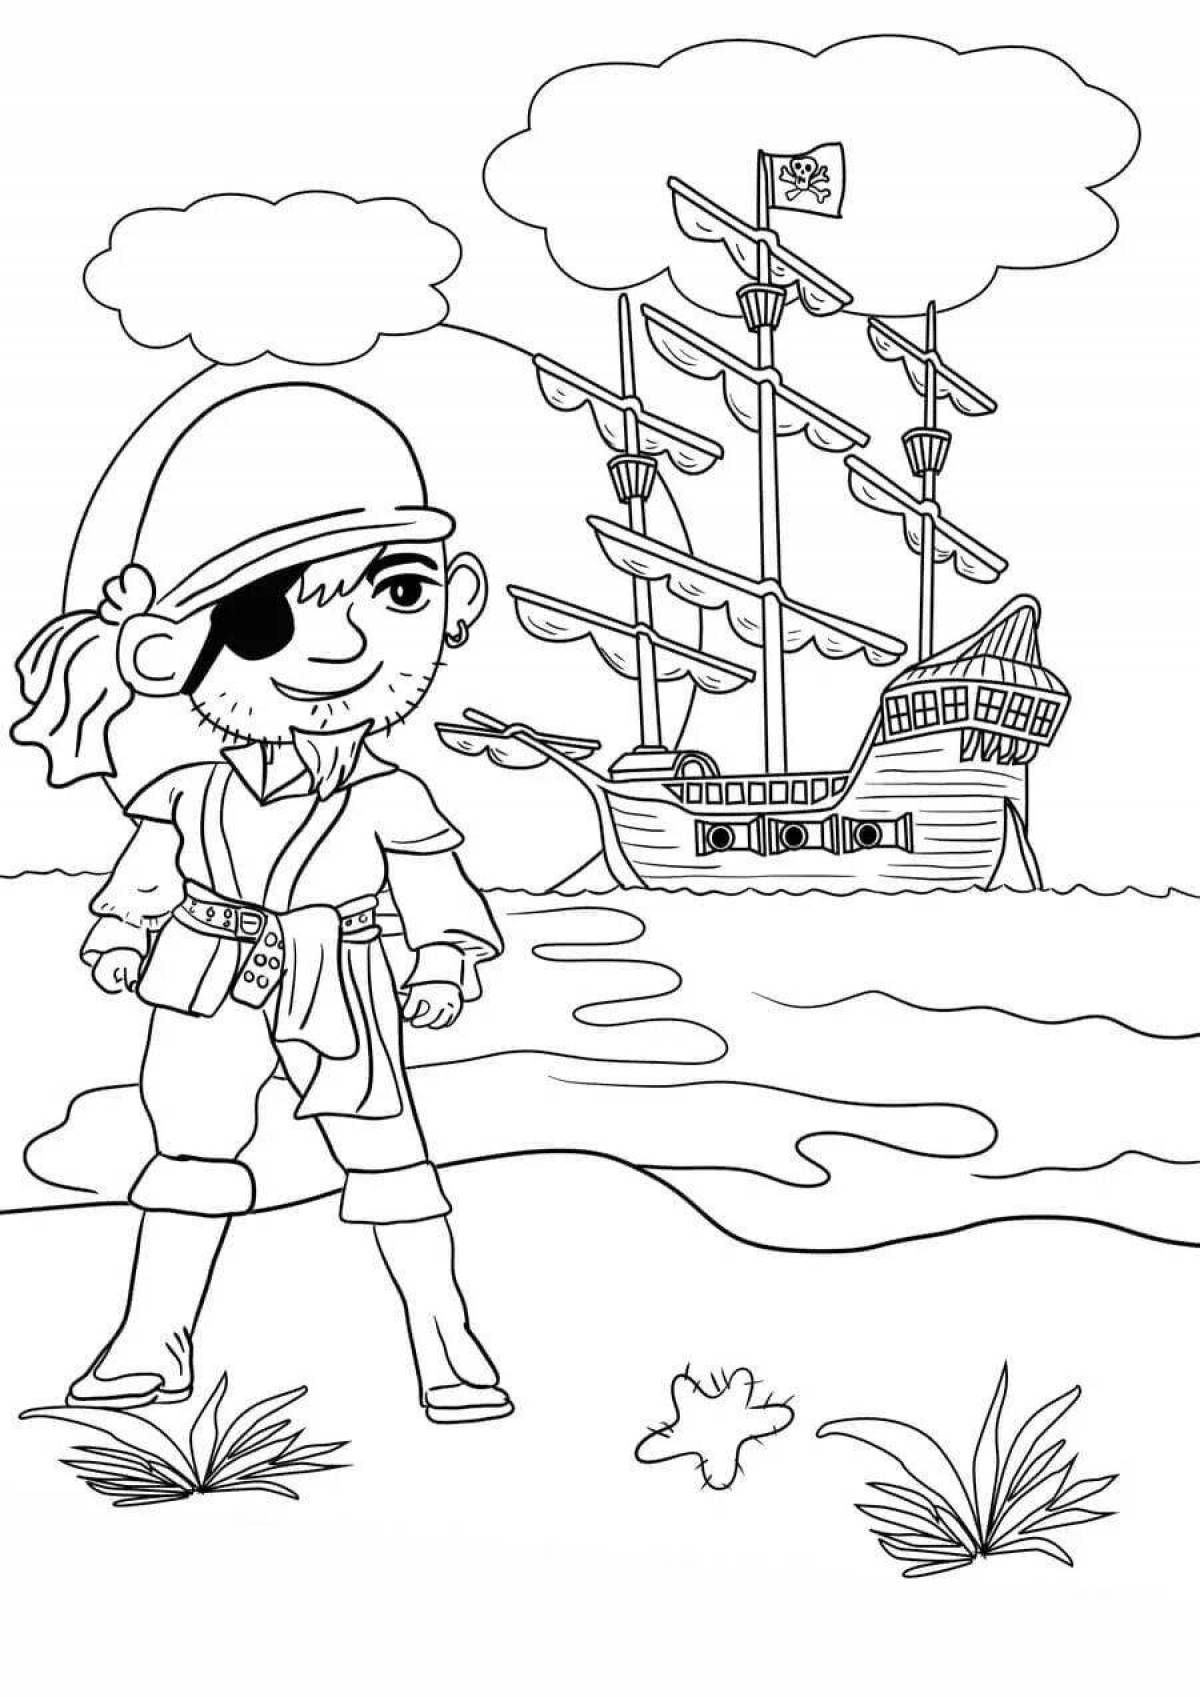 Colorful pirate coloring book for kids